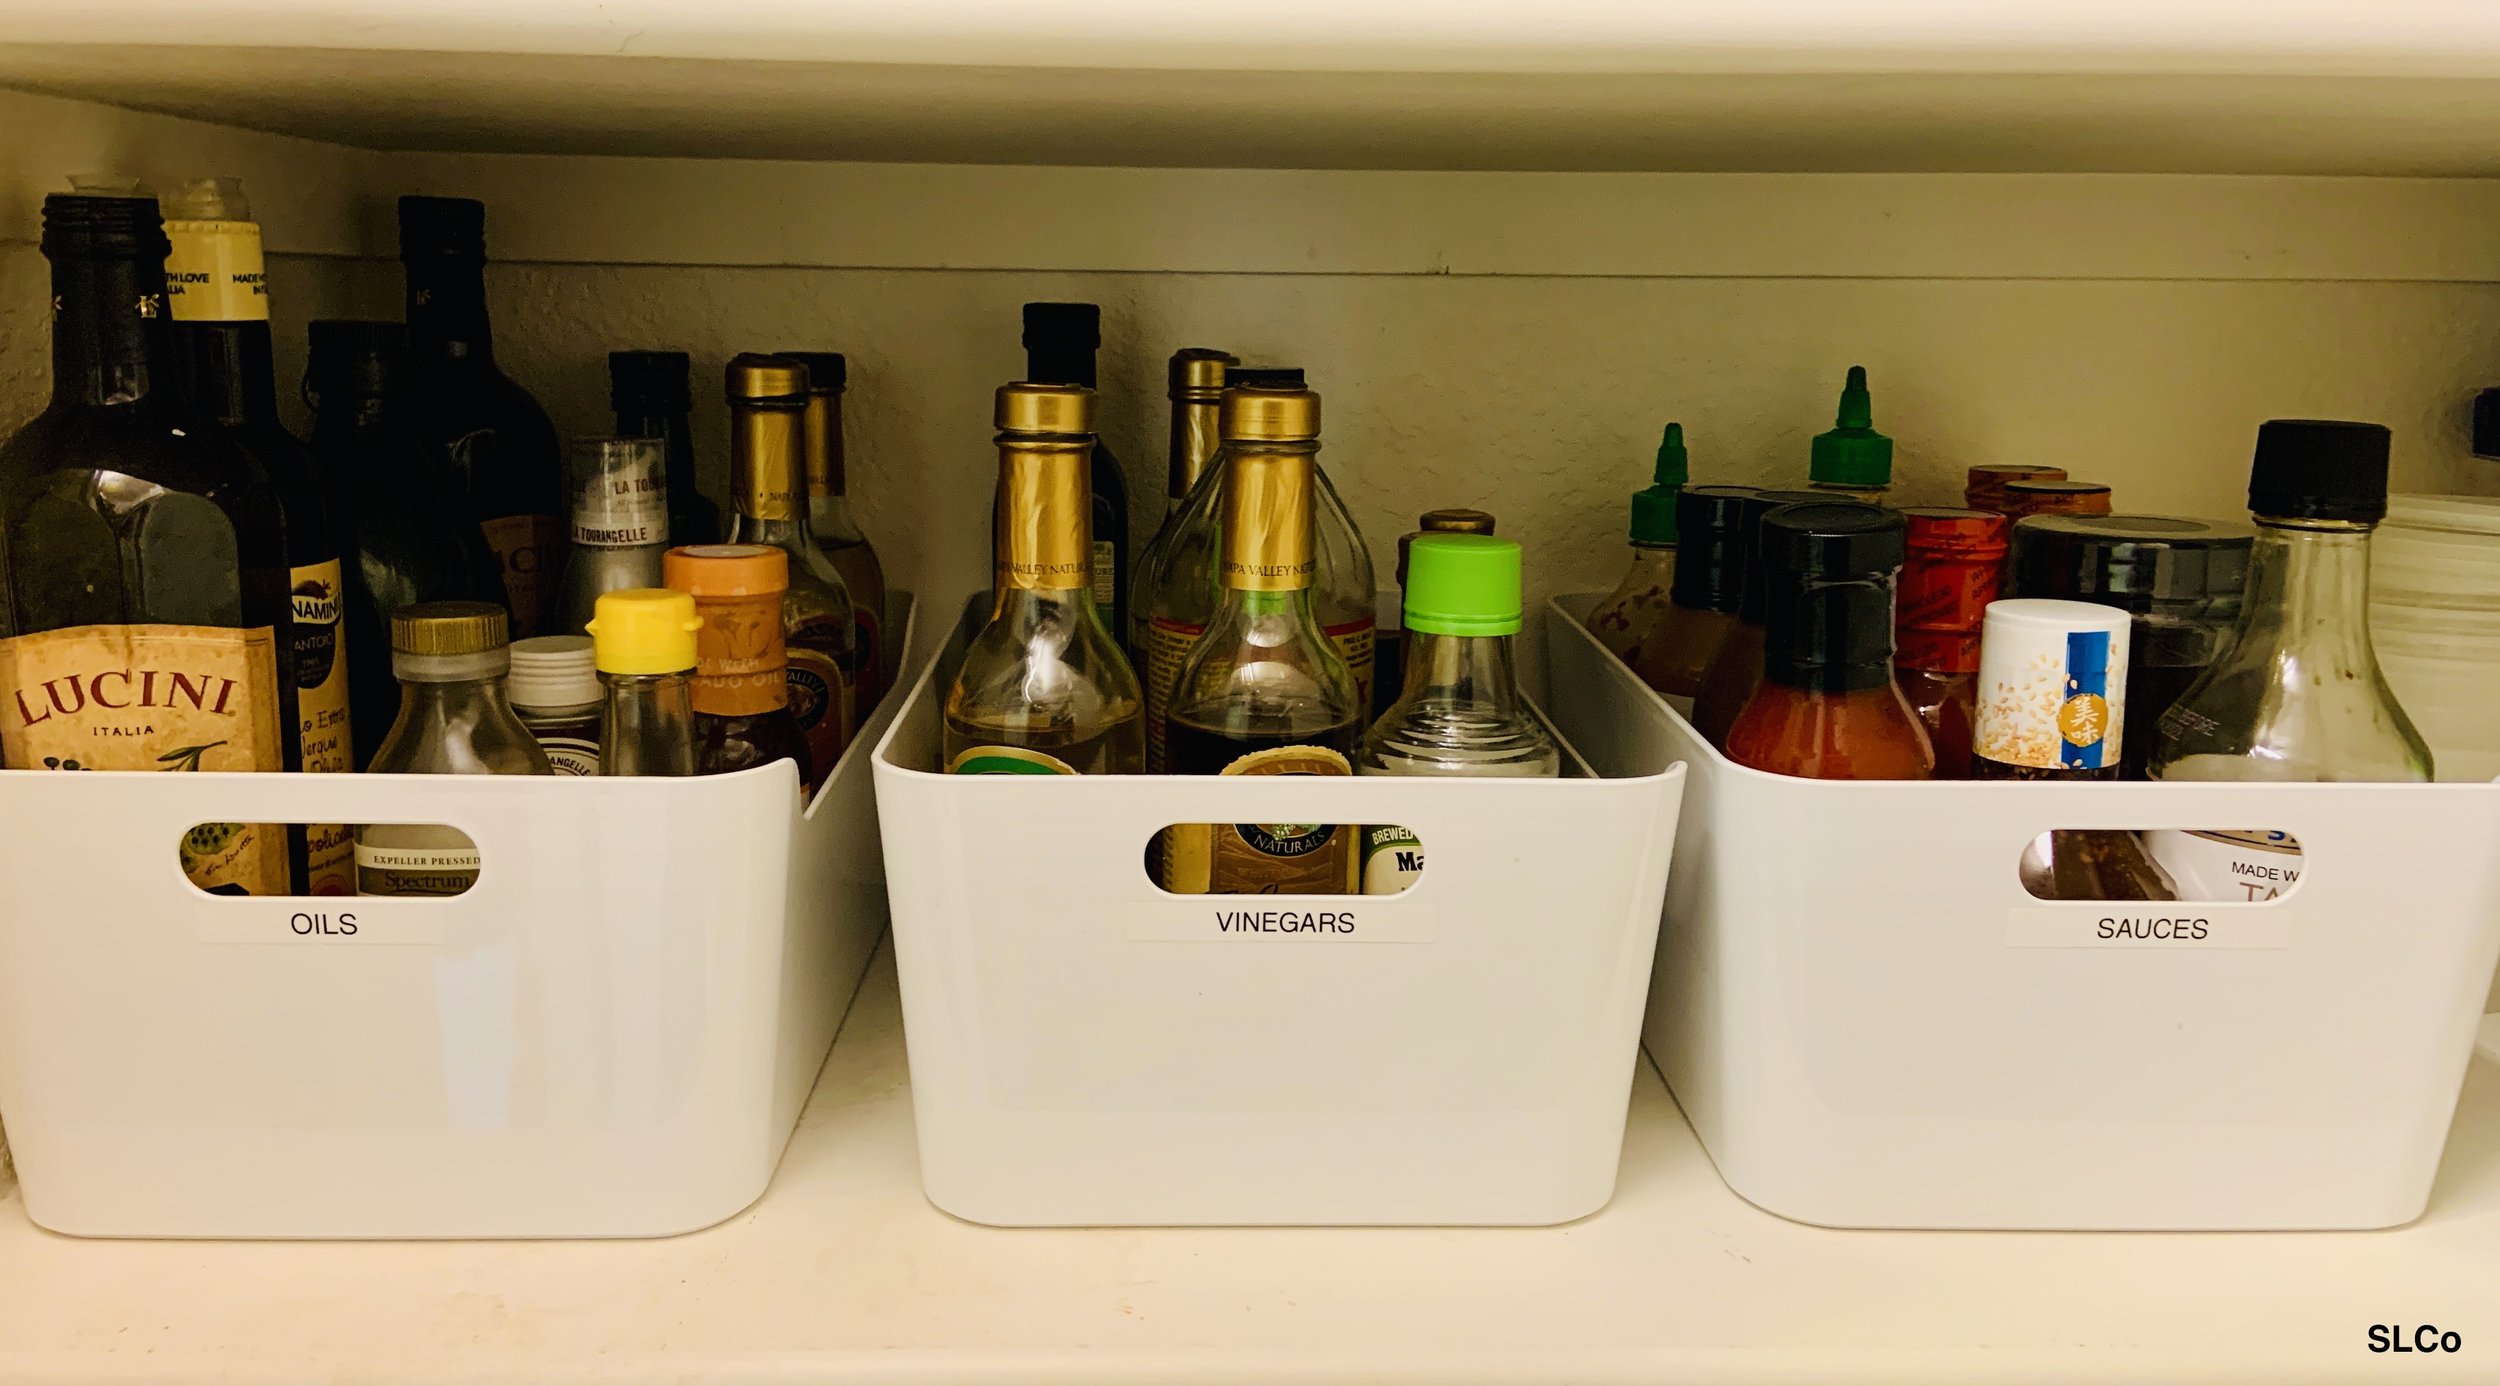 Kitchen shelf with containers labeled for oils